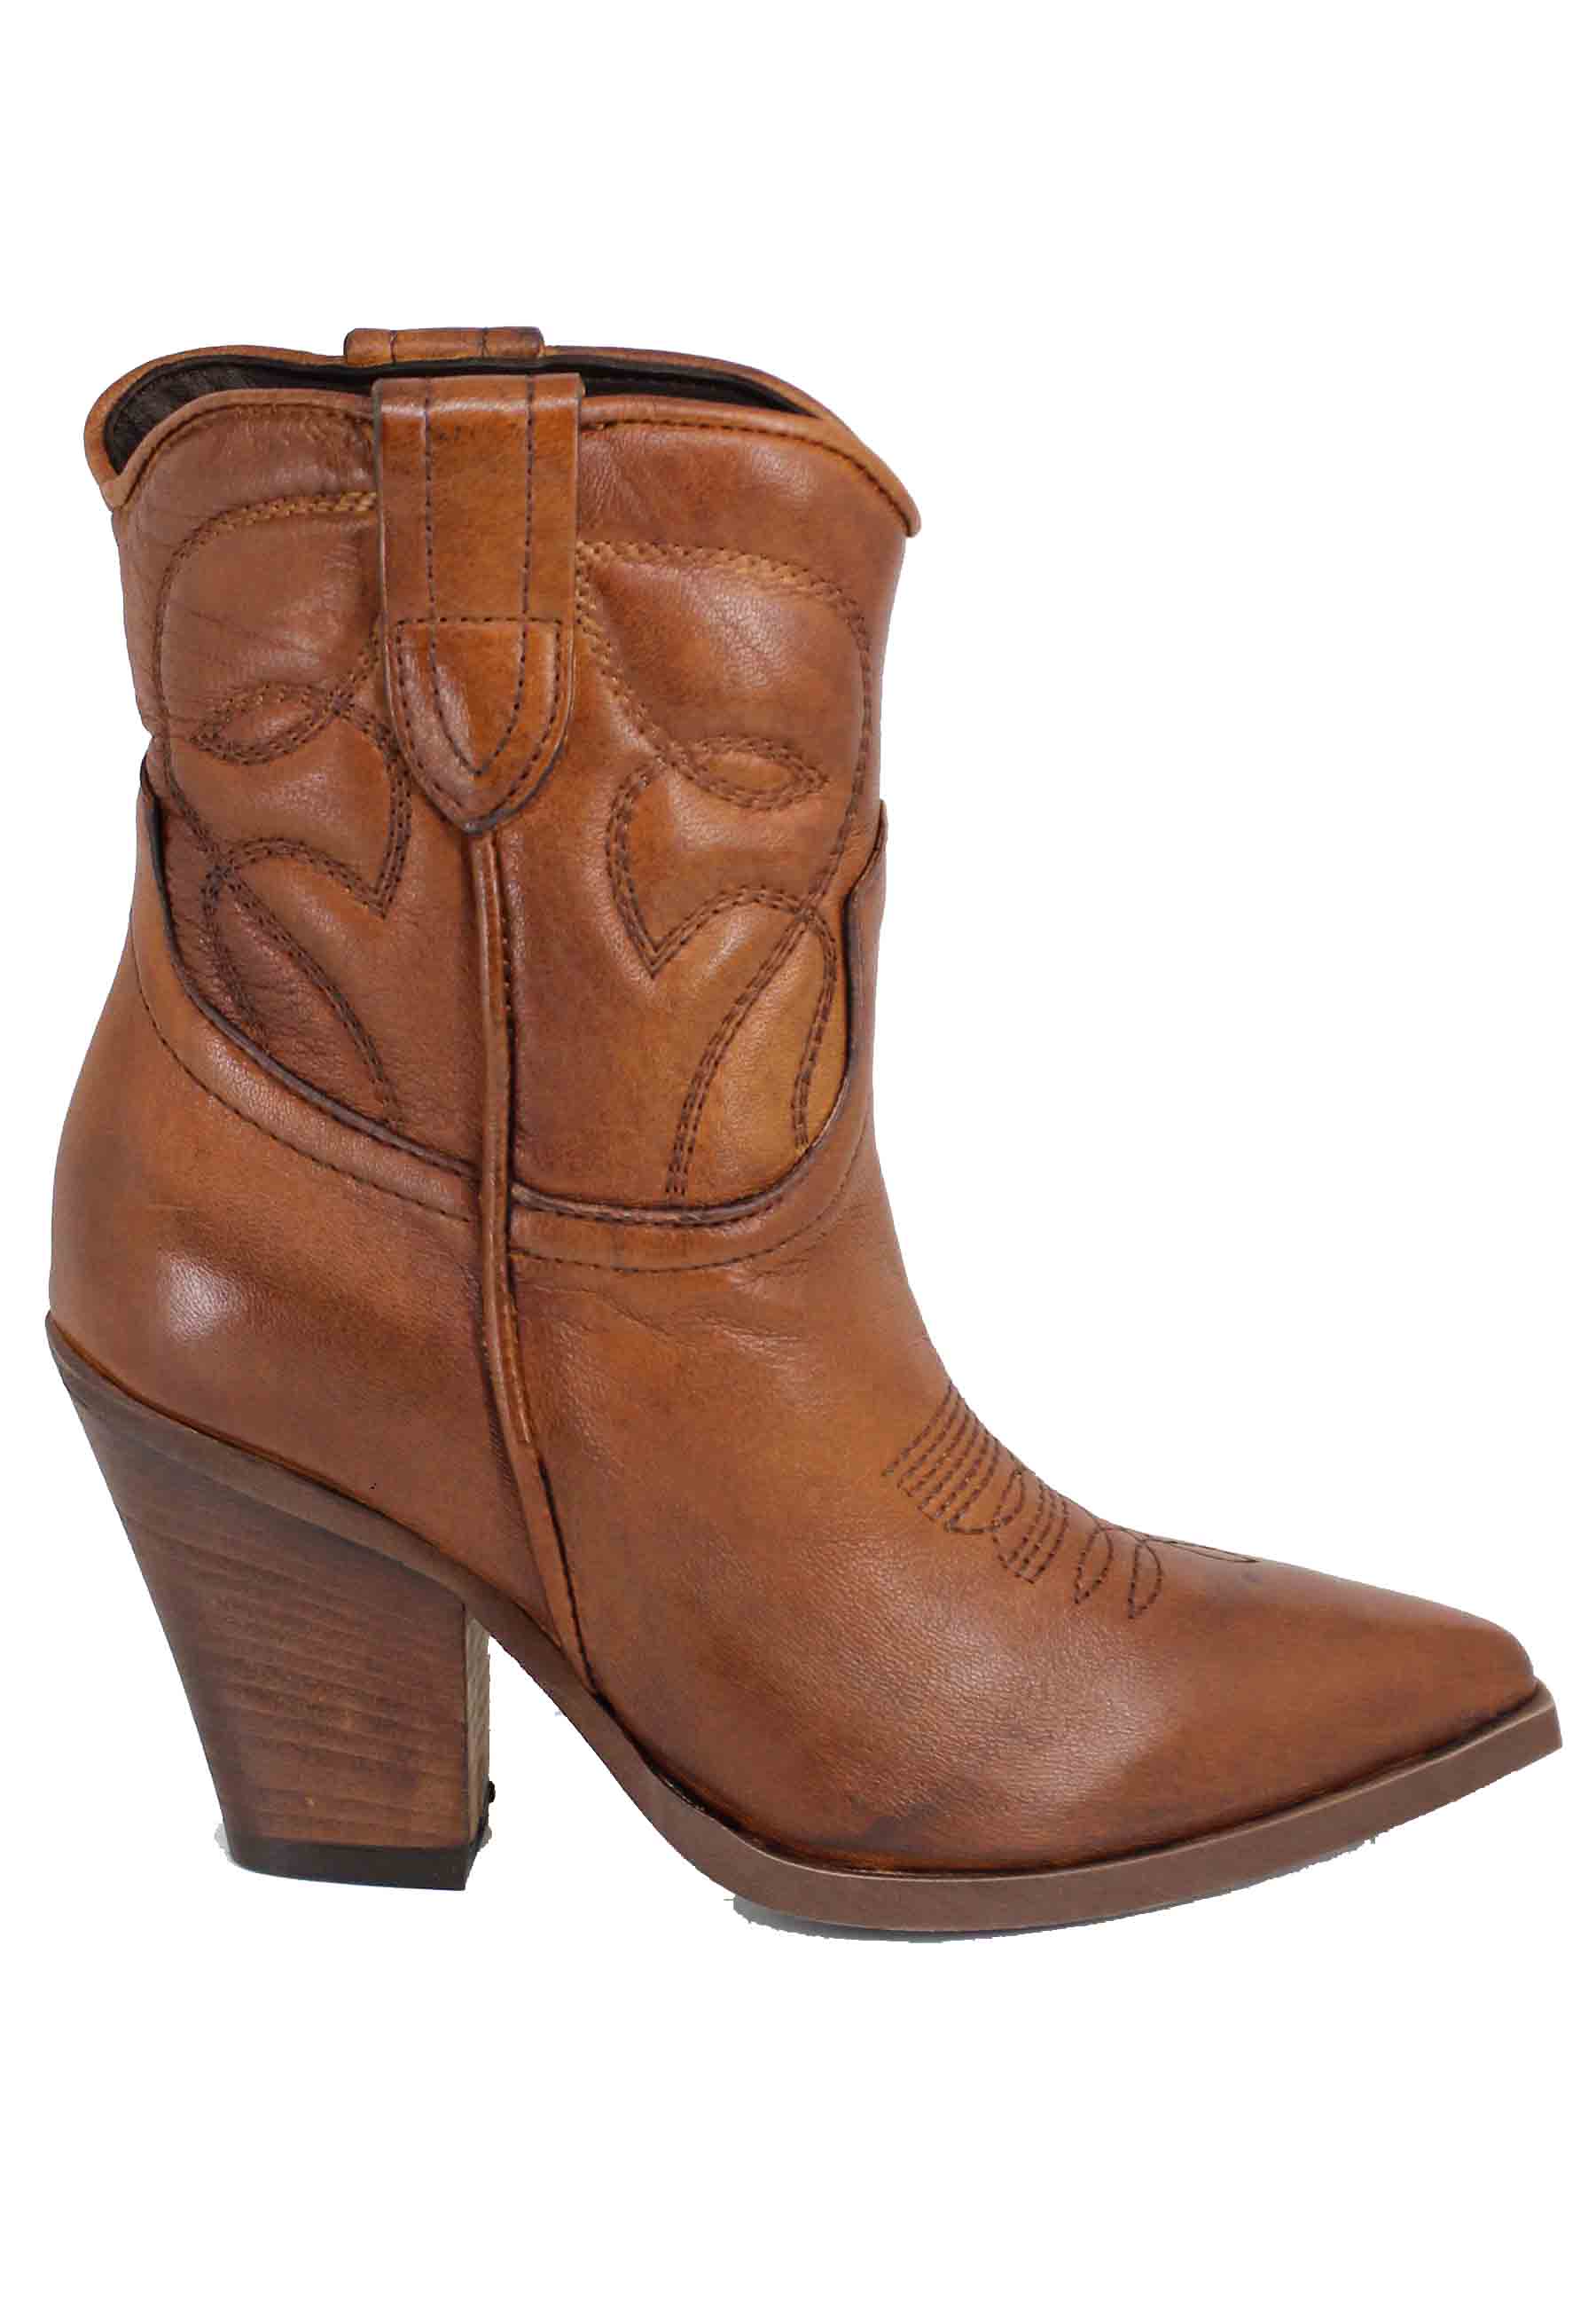 Women's Texan boots in tan leather with high heel